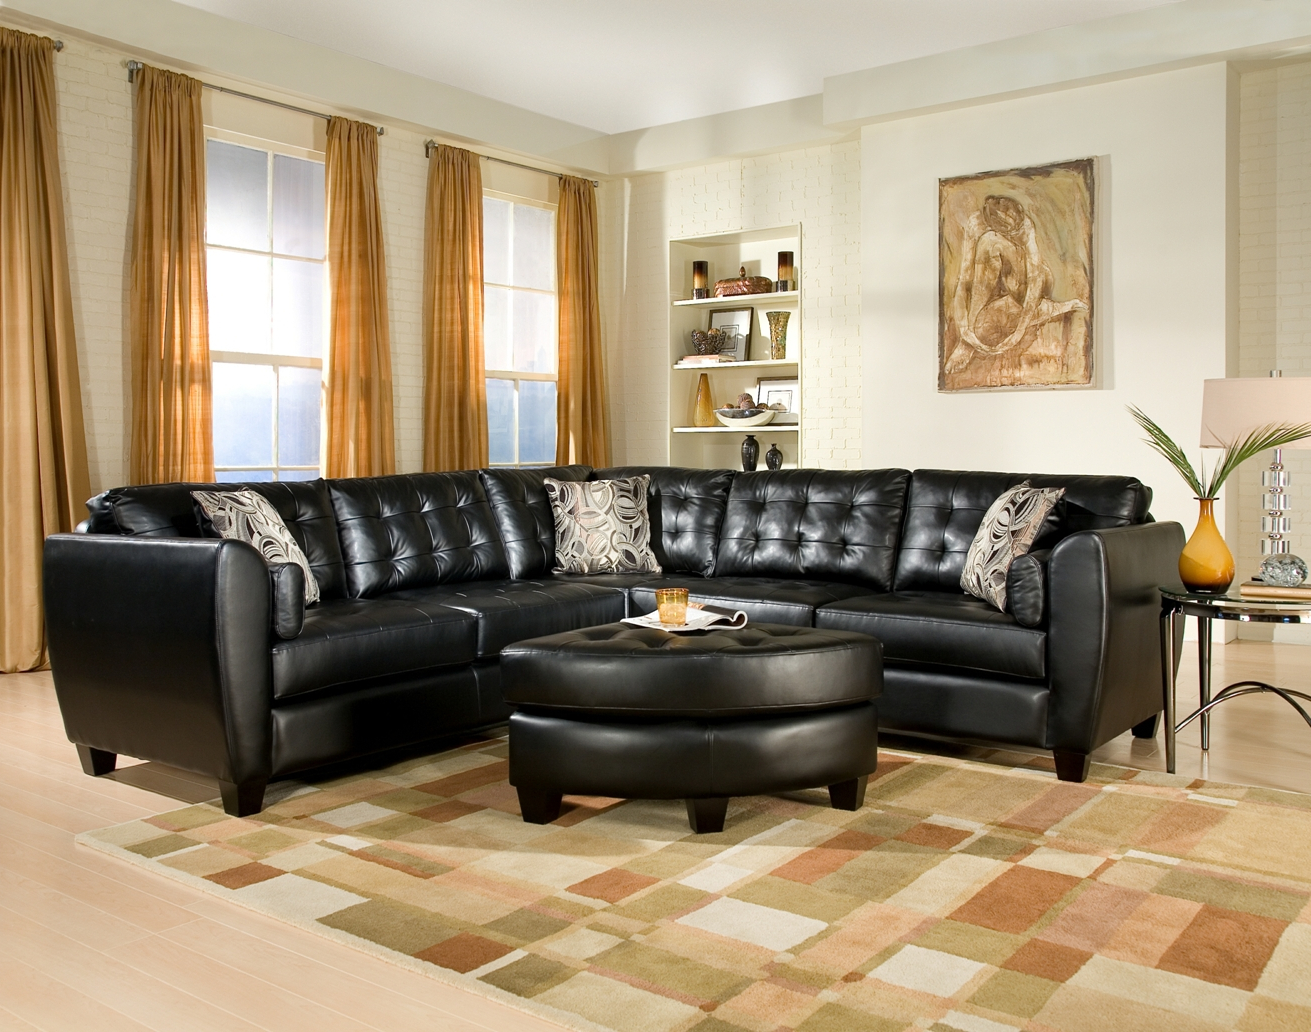 fisica3-jsantaella70: How To Decorate Living Room With Leather Furniture